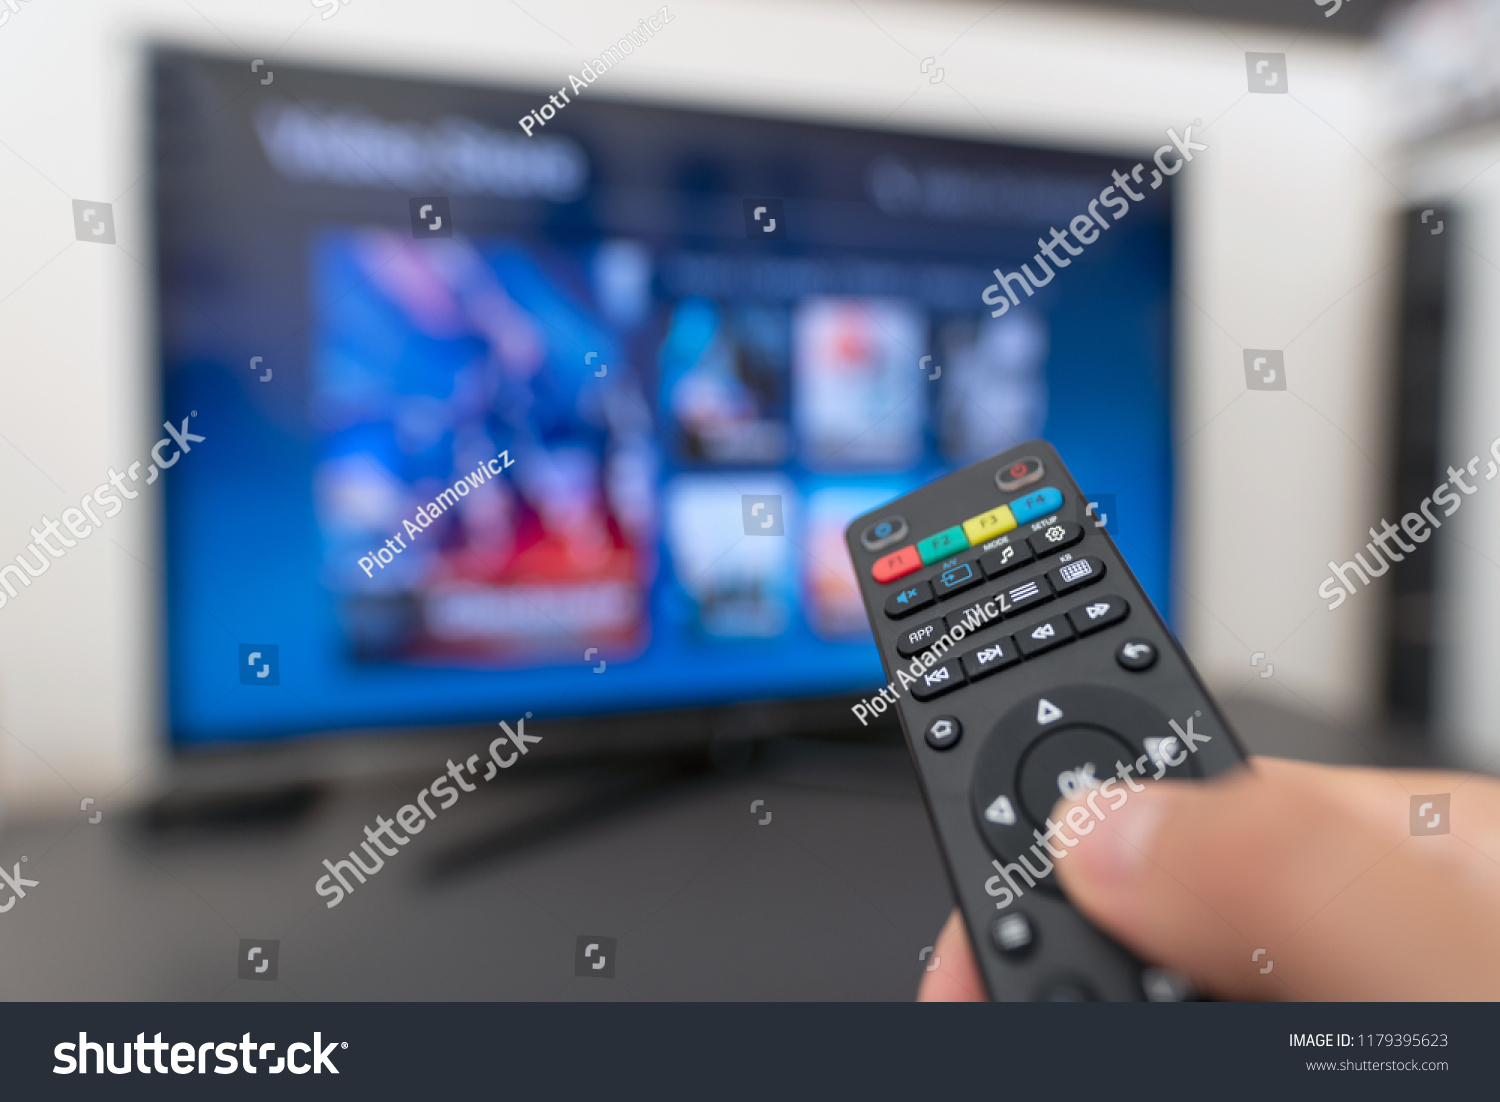 Multimedia streaming concept. Hand holding remote control. Video on demand #1179395623